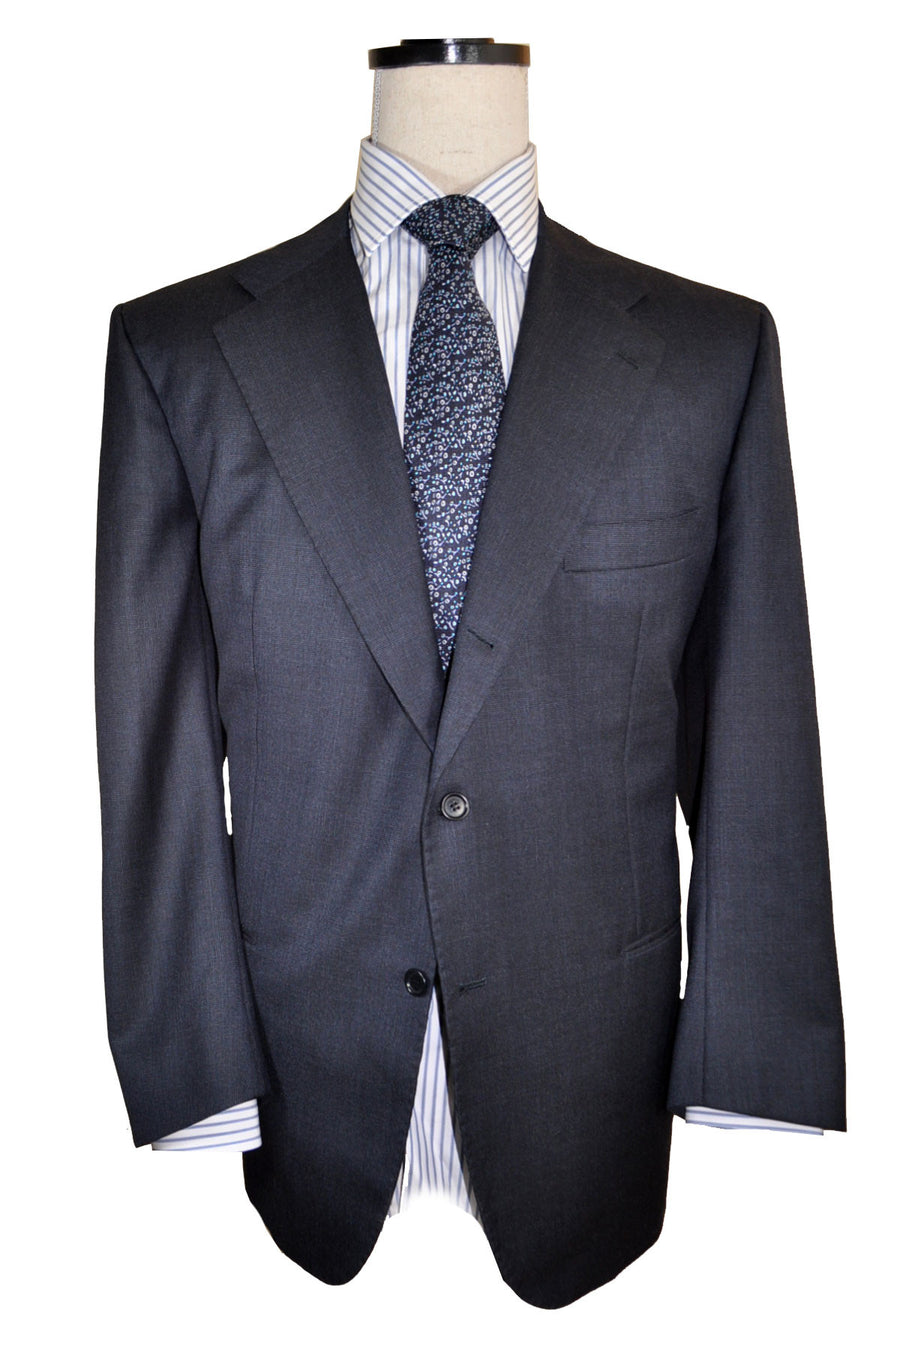 Bespoke Suits Outlet, Kiton Suit, Tom Ford, Borrelli Sport Coat Tagged ...